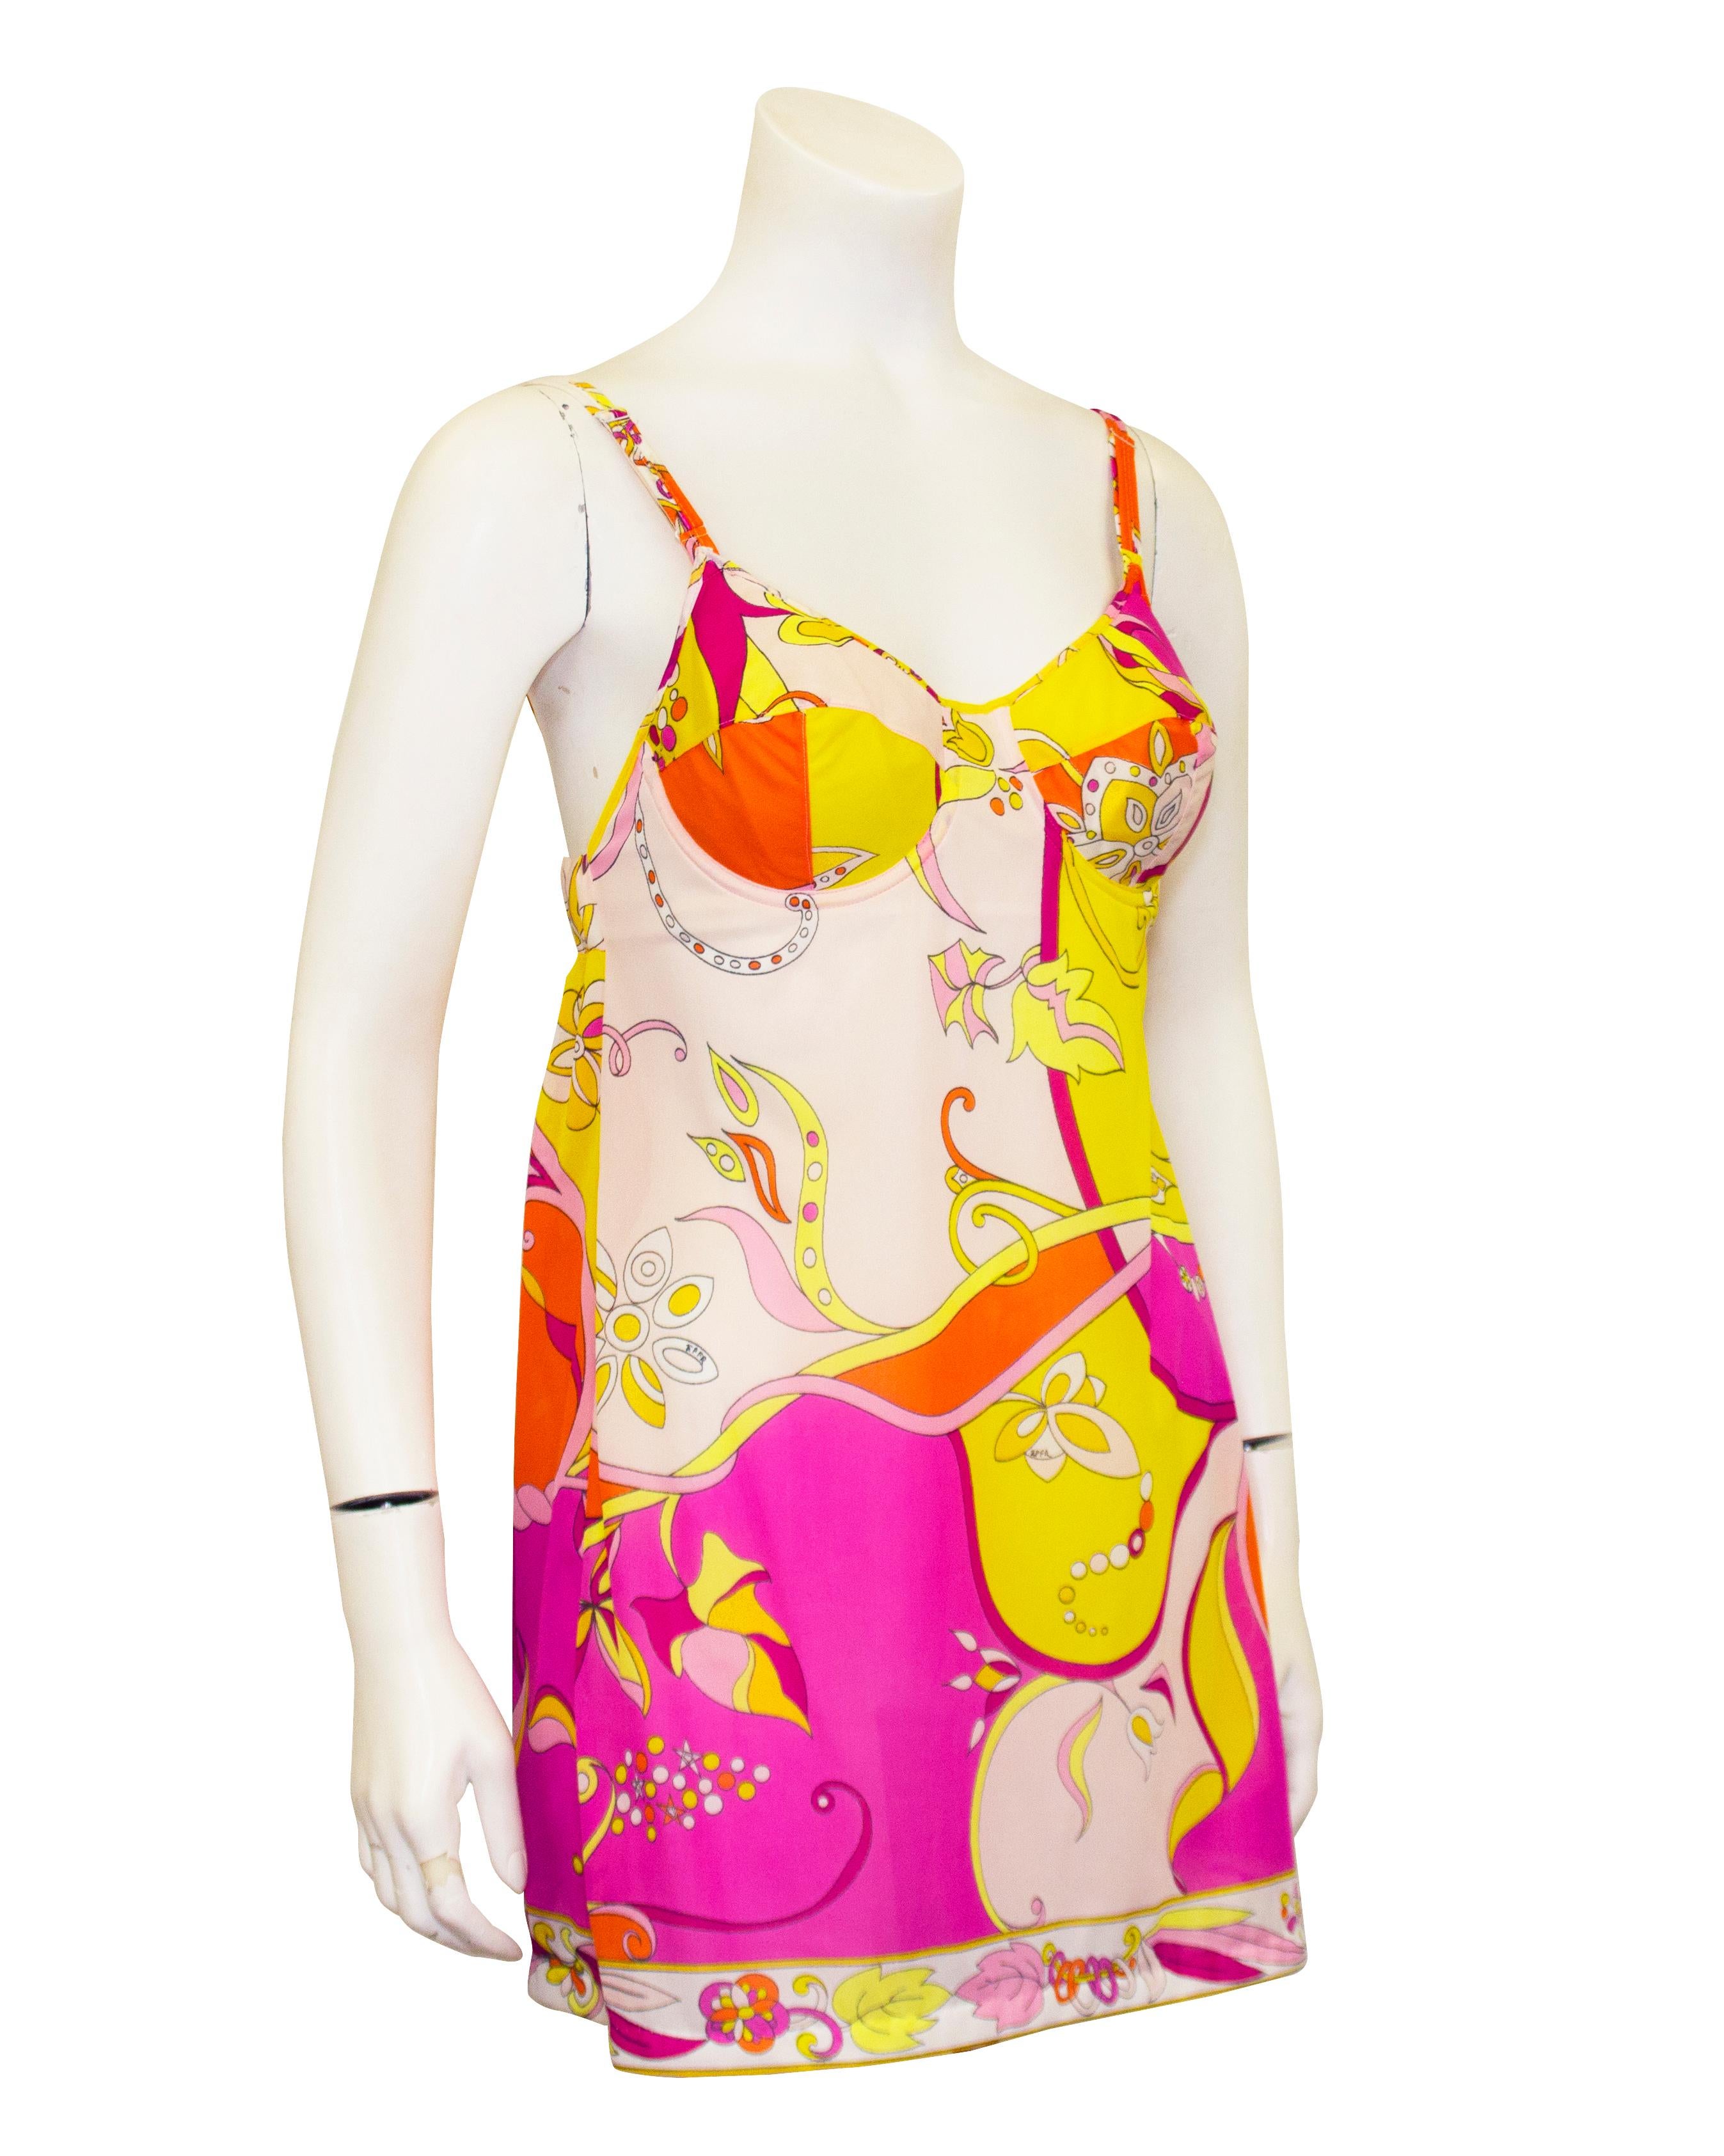 Beautifully vibrant Emilio Pucci for Formfit Rogers baby doll slipdress/negligee from the 1960s. Abstract bright pink, yellow and orange print. Adjustable spaghetti straps with underwire bra bust and empire shape. Elastic back with hook and eye